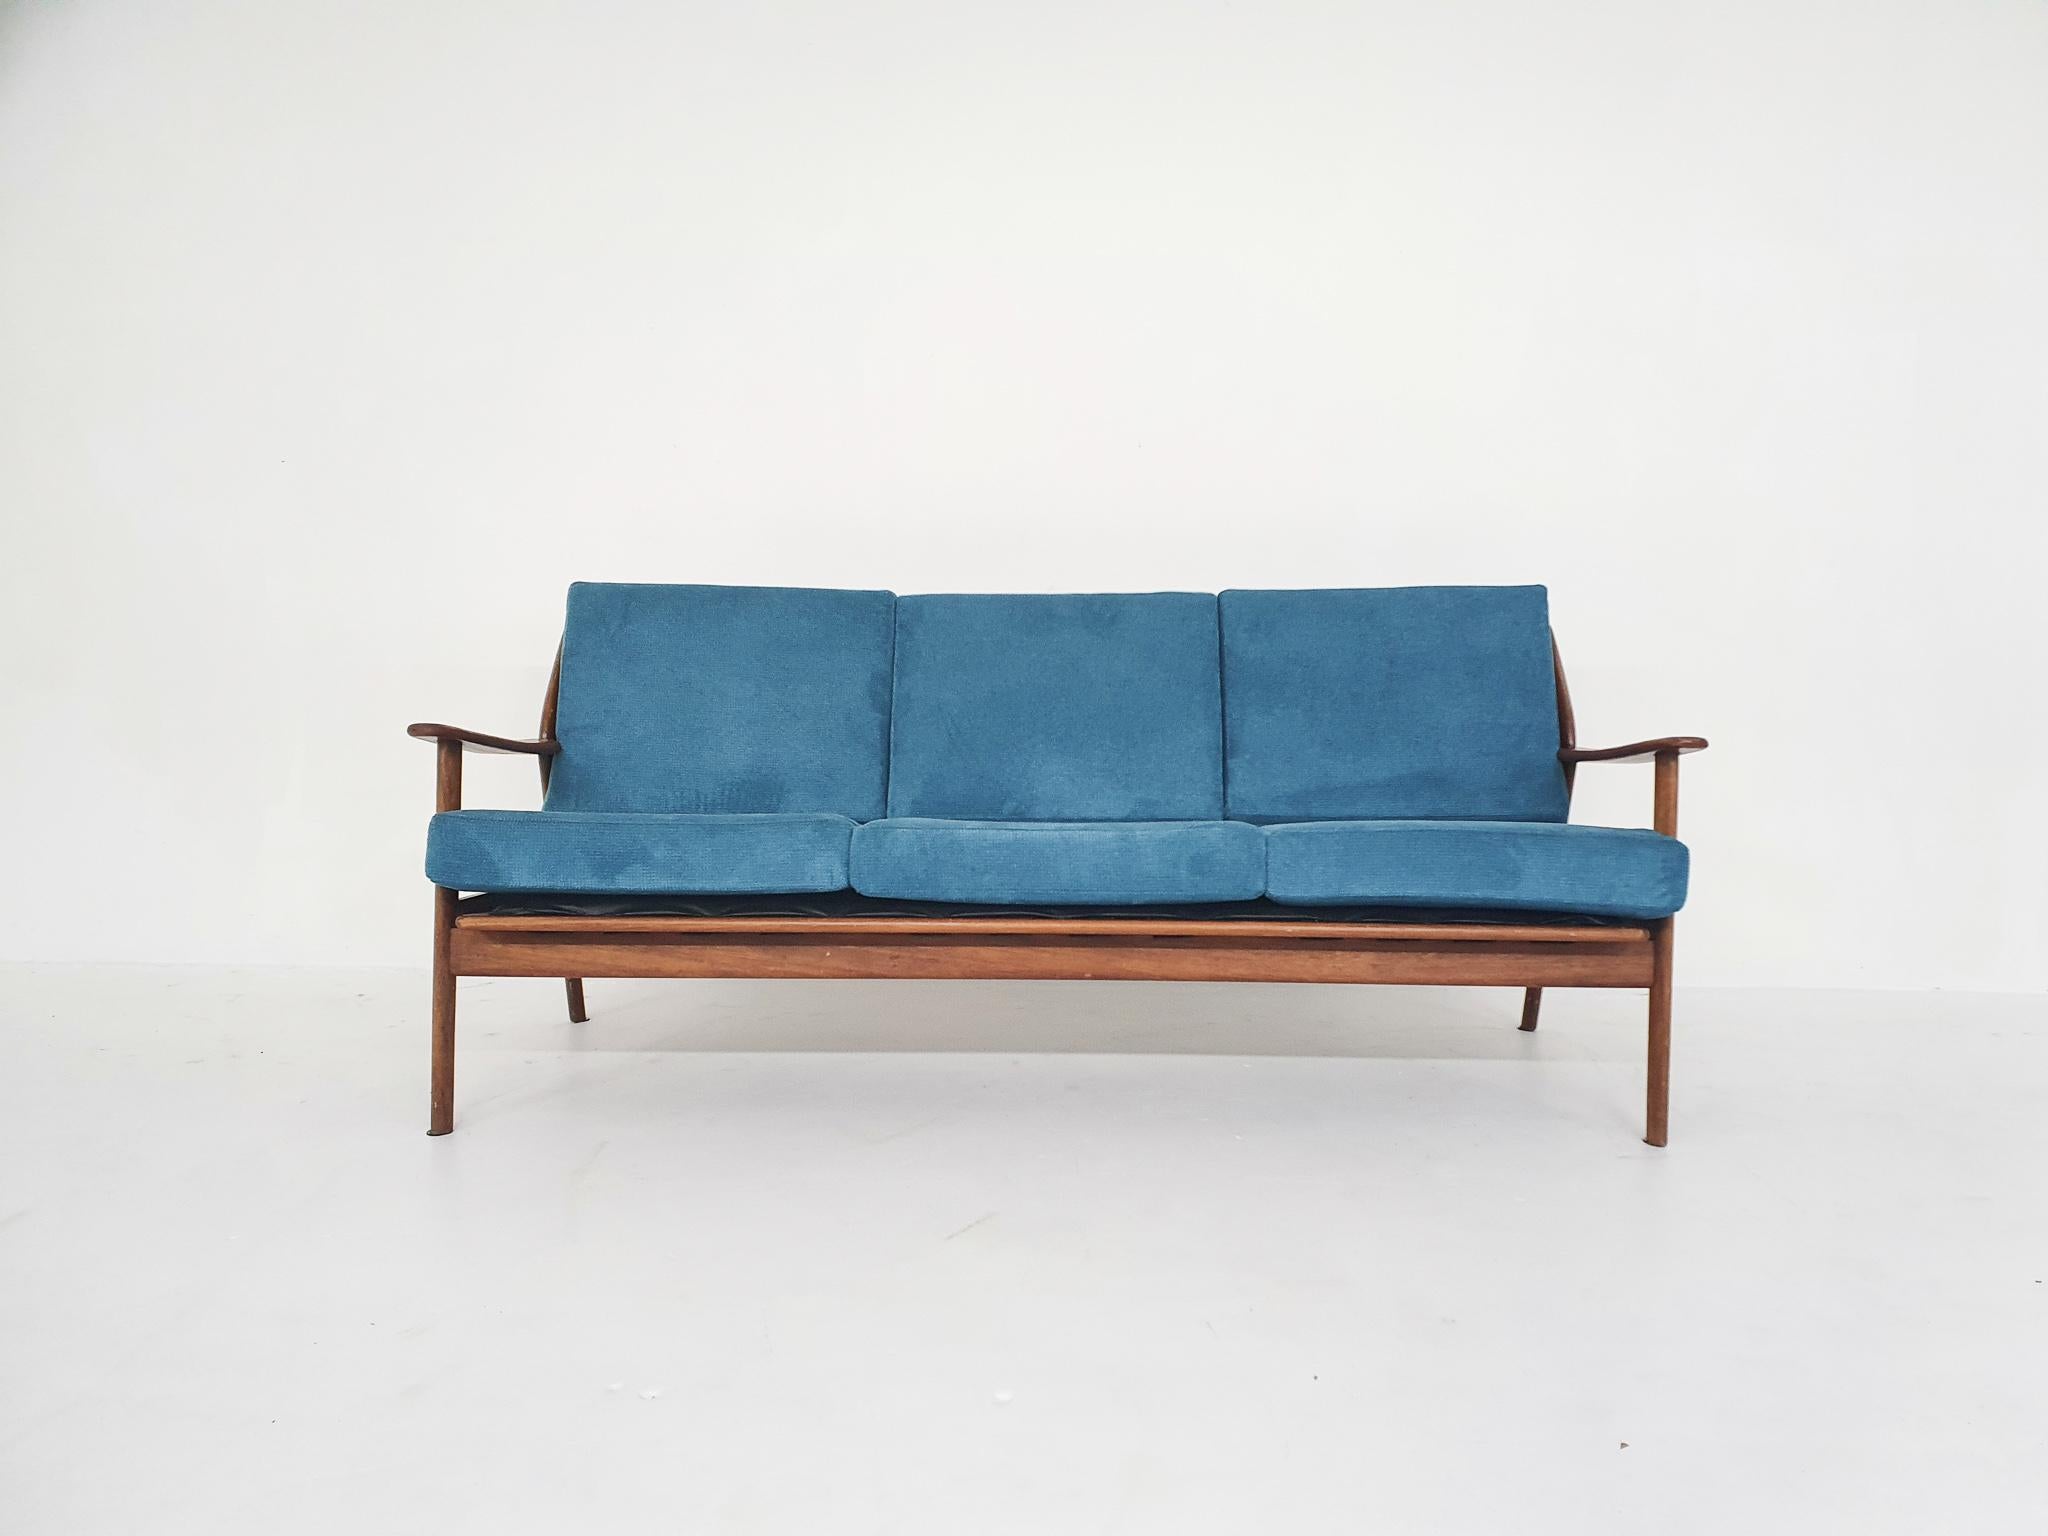 Teak sofa with new springs. New cushions with new green-blue upholstery.
Inspired by Scandinavian design.